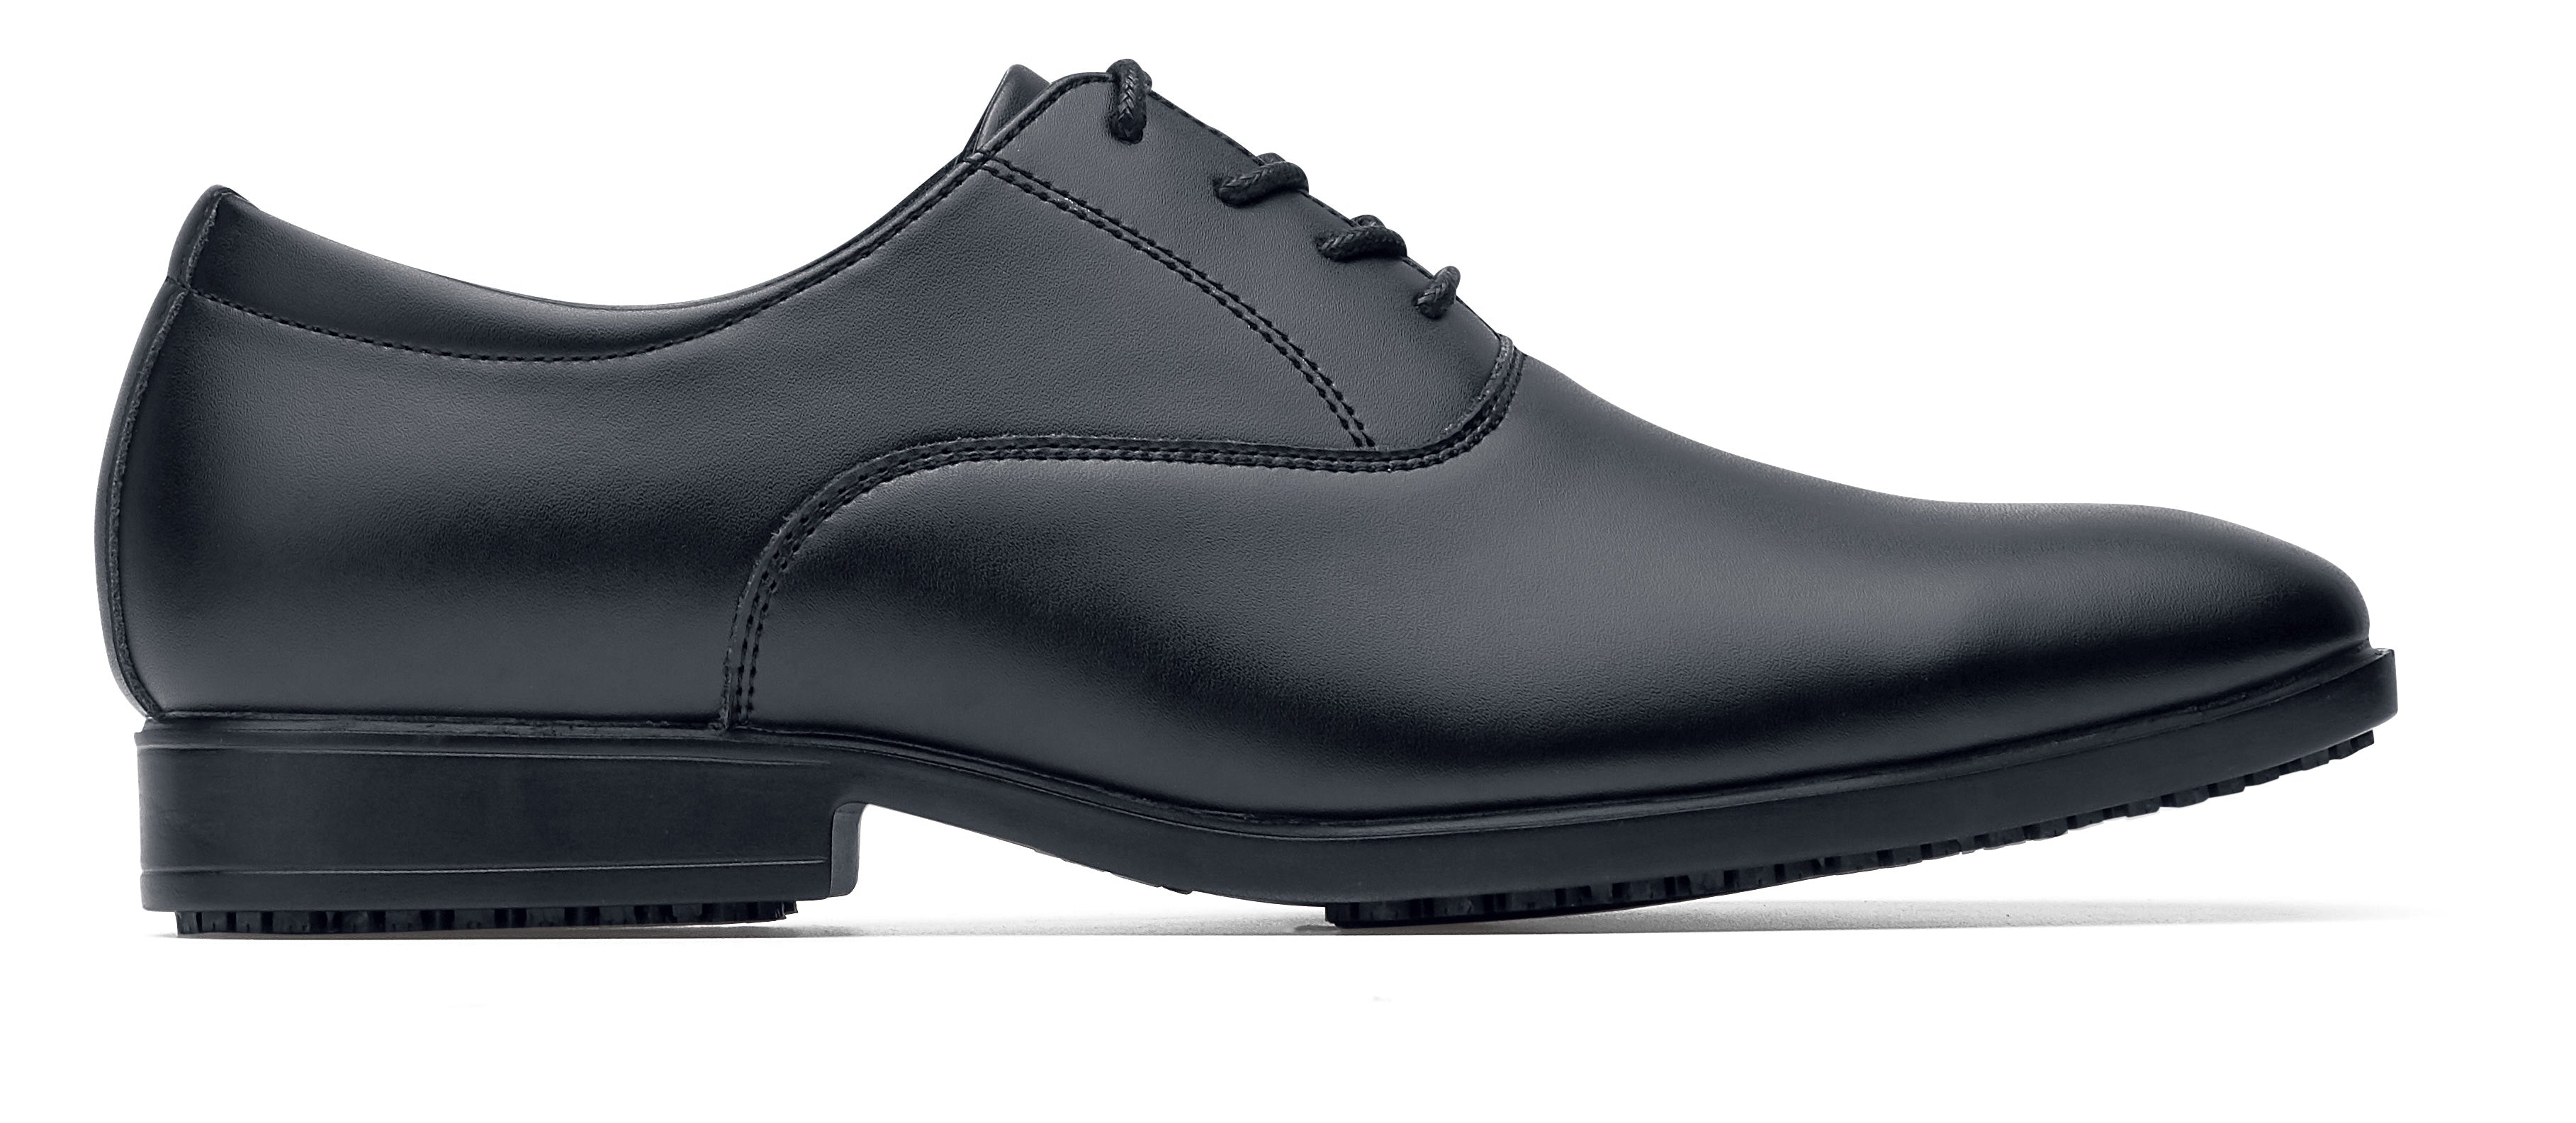 Slip resistant black formal shoe with Water Resistant Leather Upper, right side view.